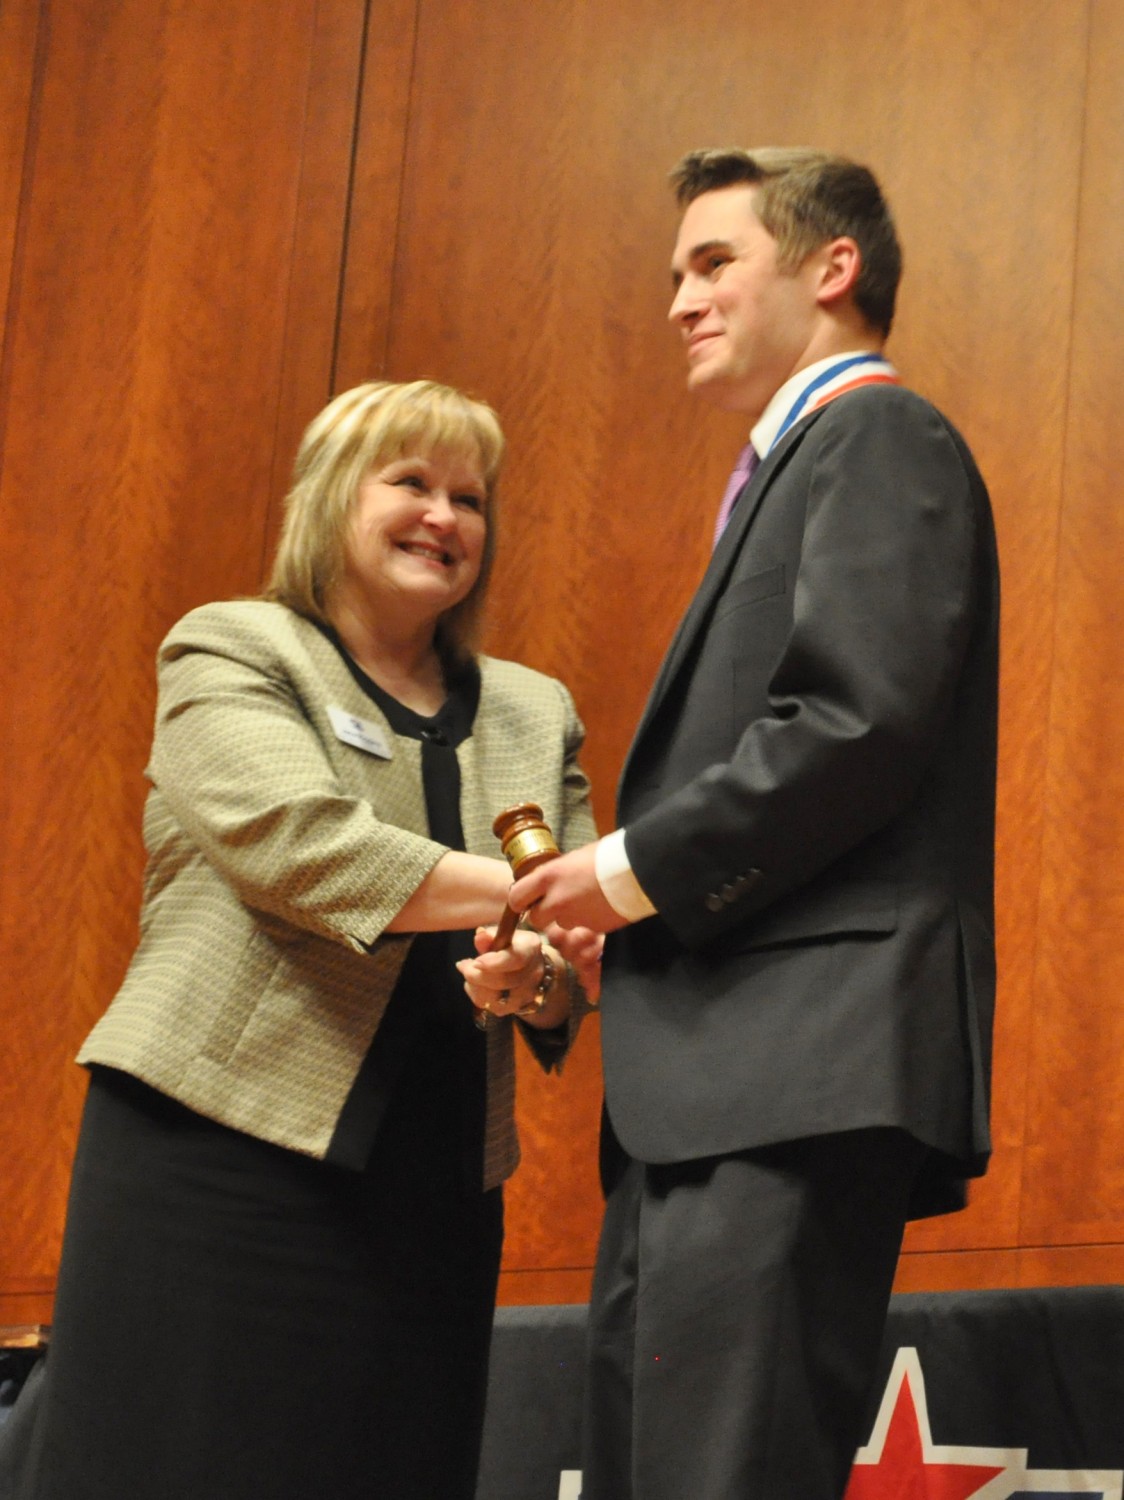 Speech and Debate Director Jana Riggins congratulates Zach McMeans from Borden County ISD for also winning the the Outstanding Presiding Officer.